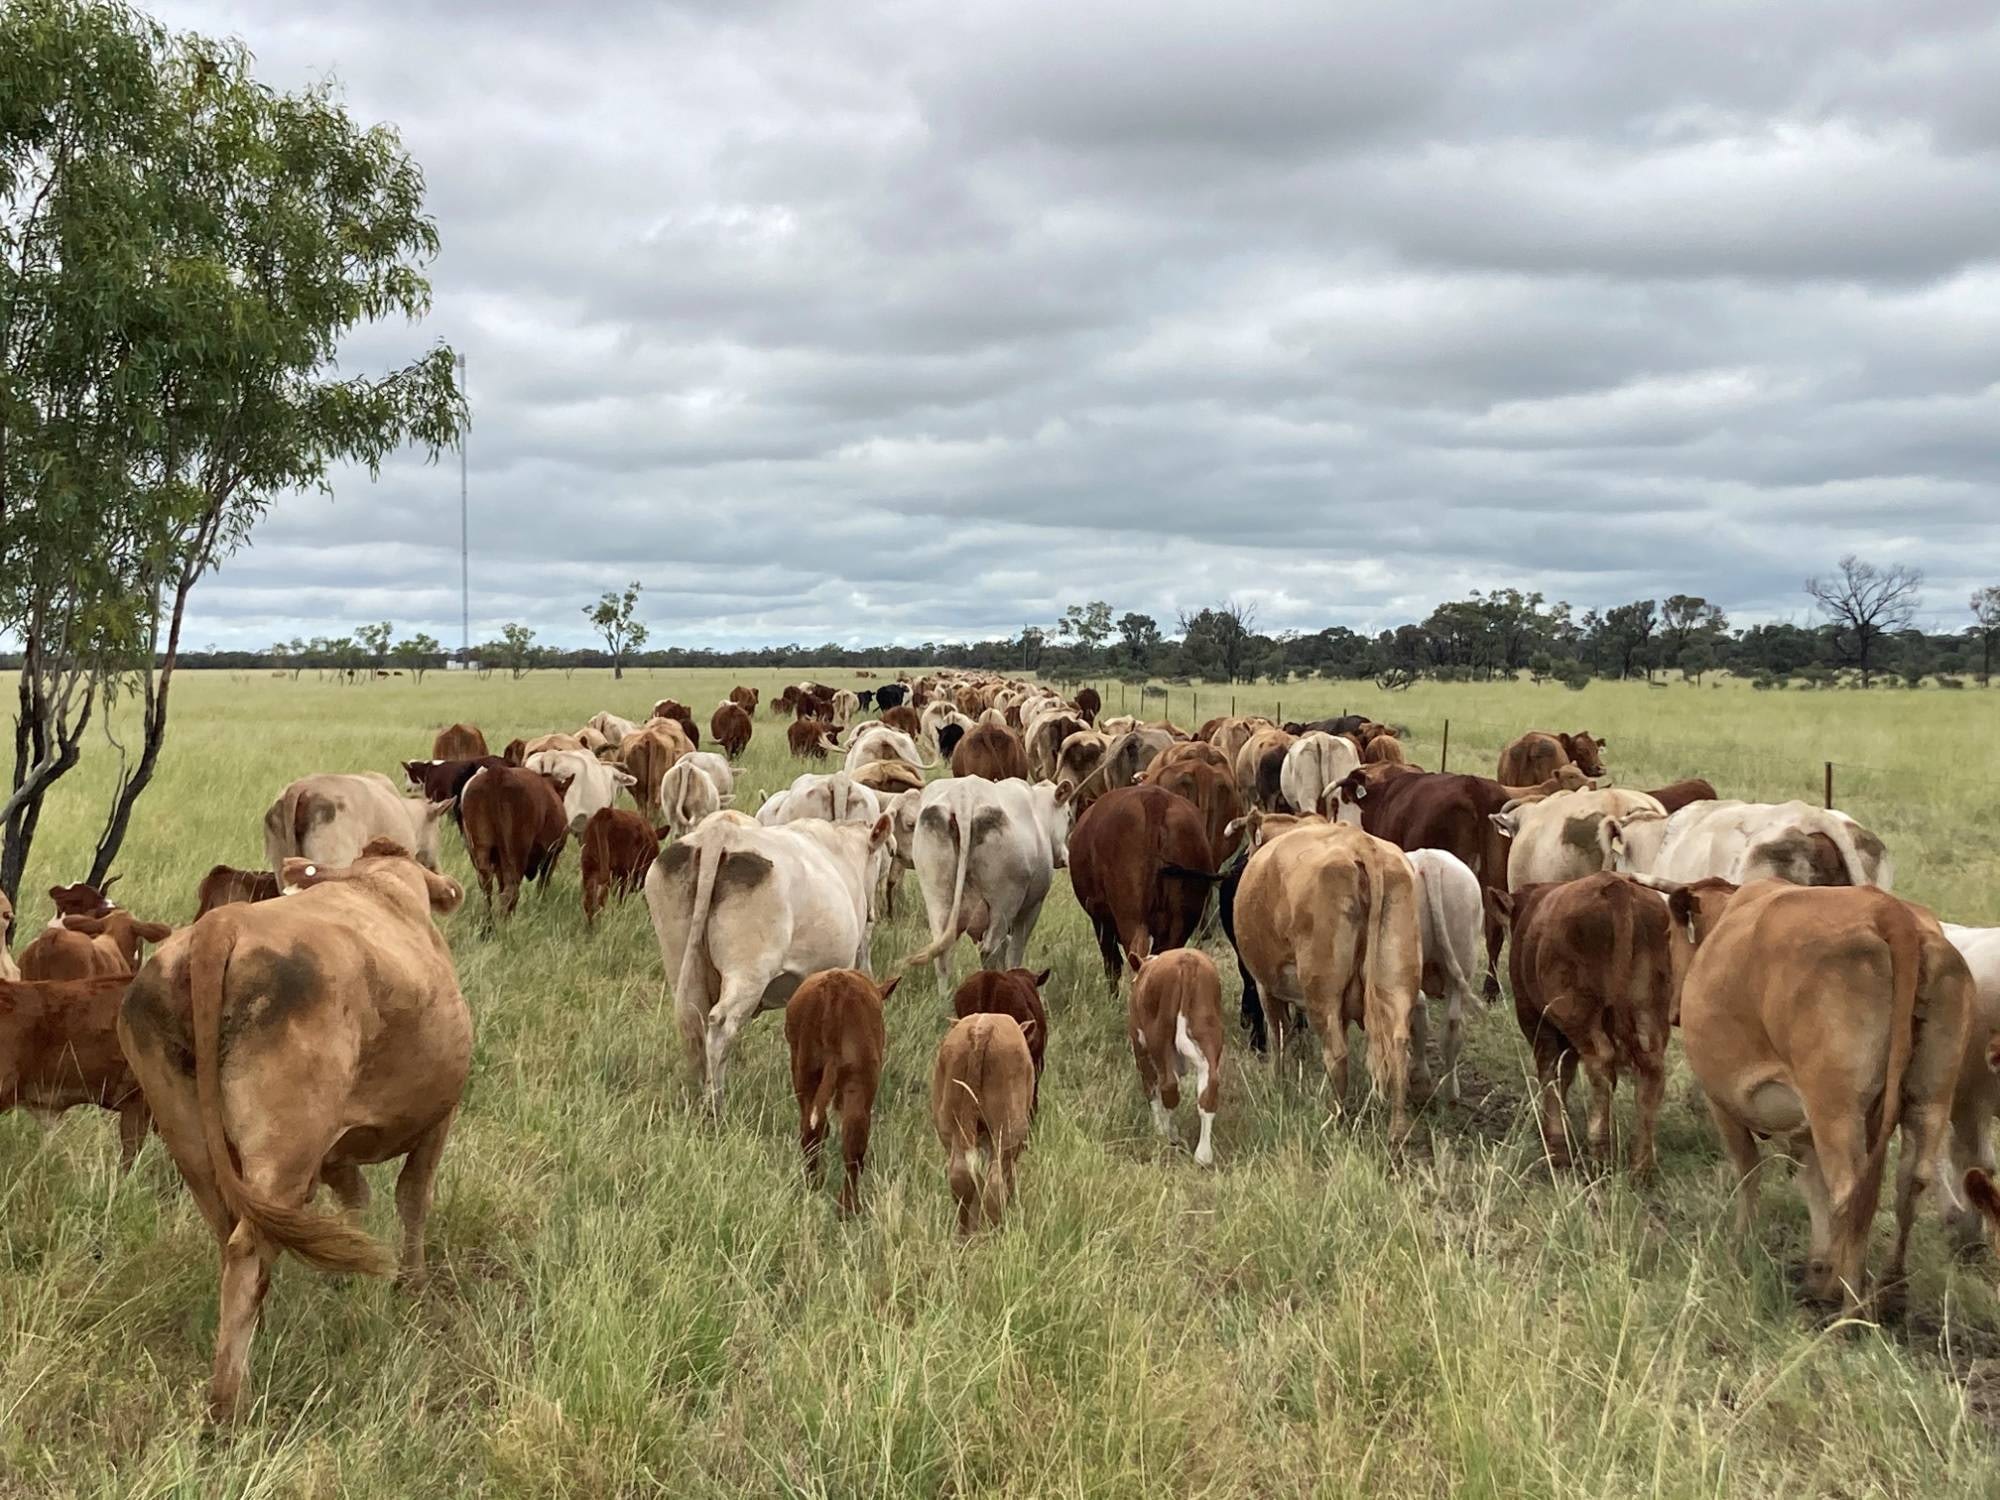 Ben Simpson, Thistlebank Grazing, finds success with Simmental bulls from the Queensland Simmental Bull Sale in his commercial beef operation at Aramac.